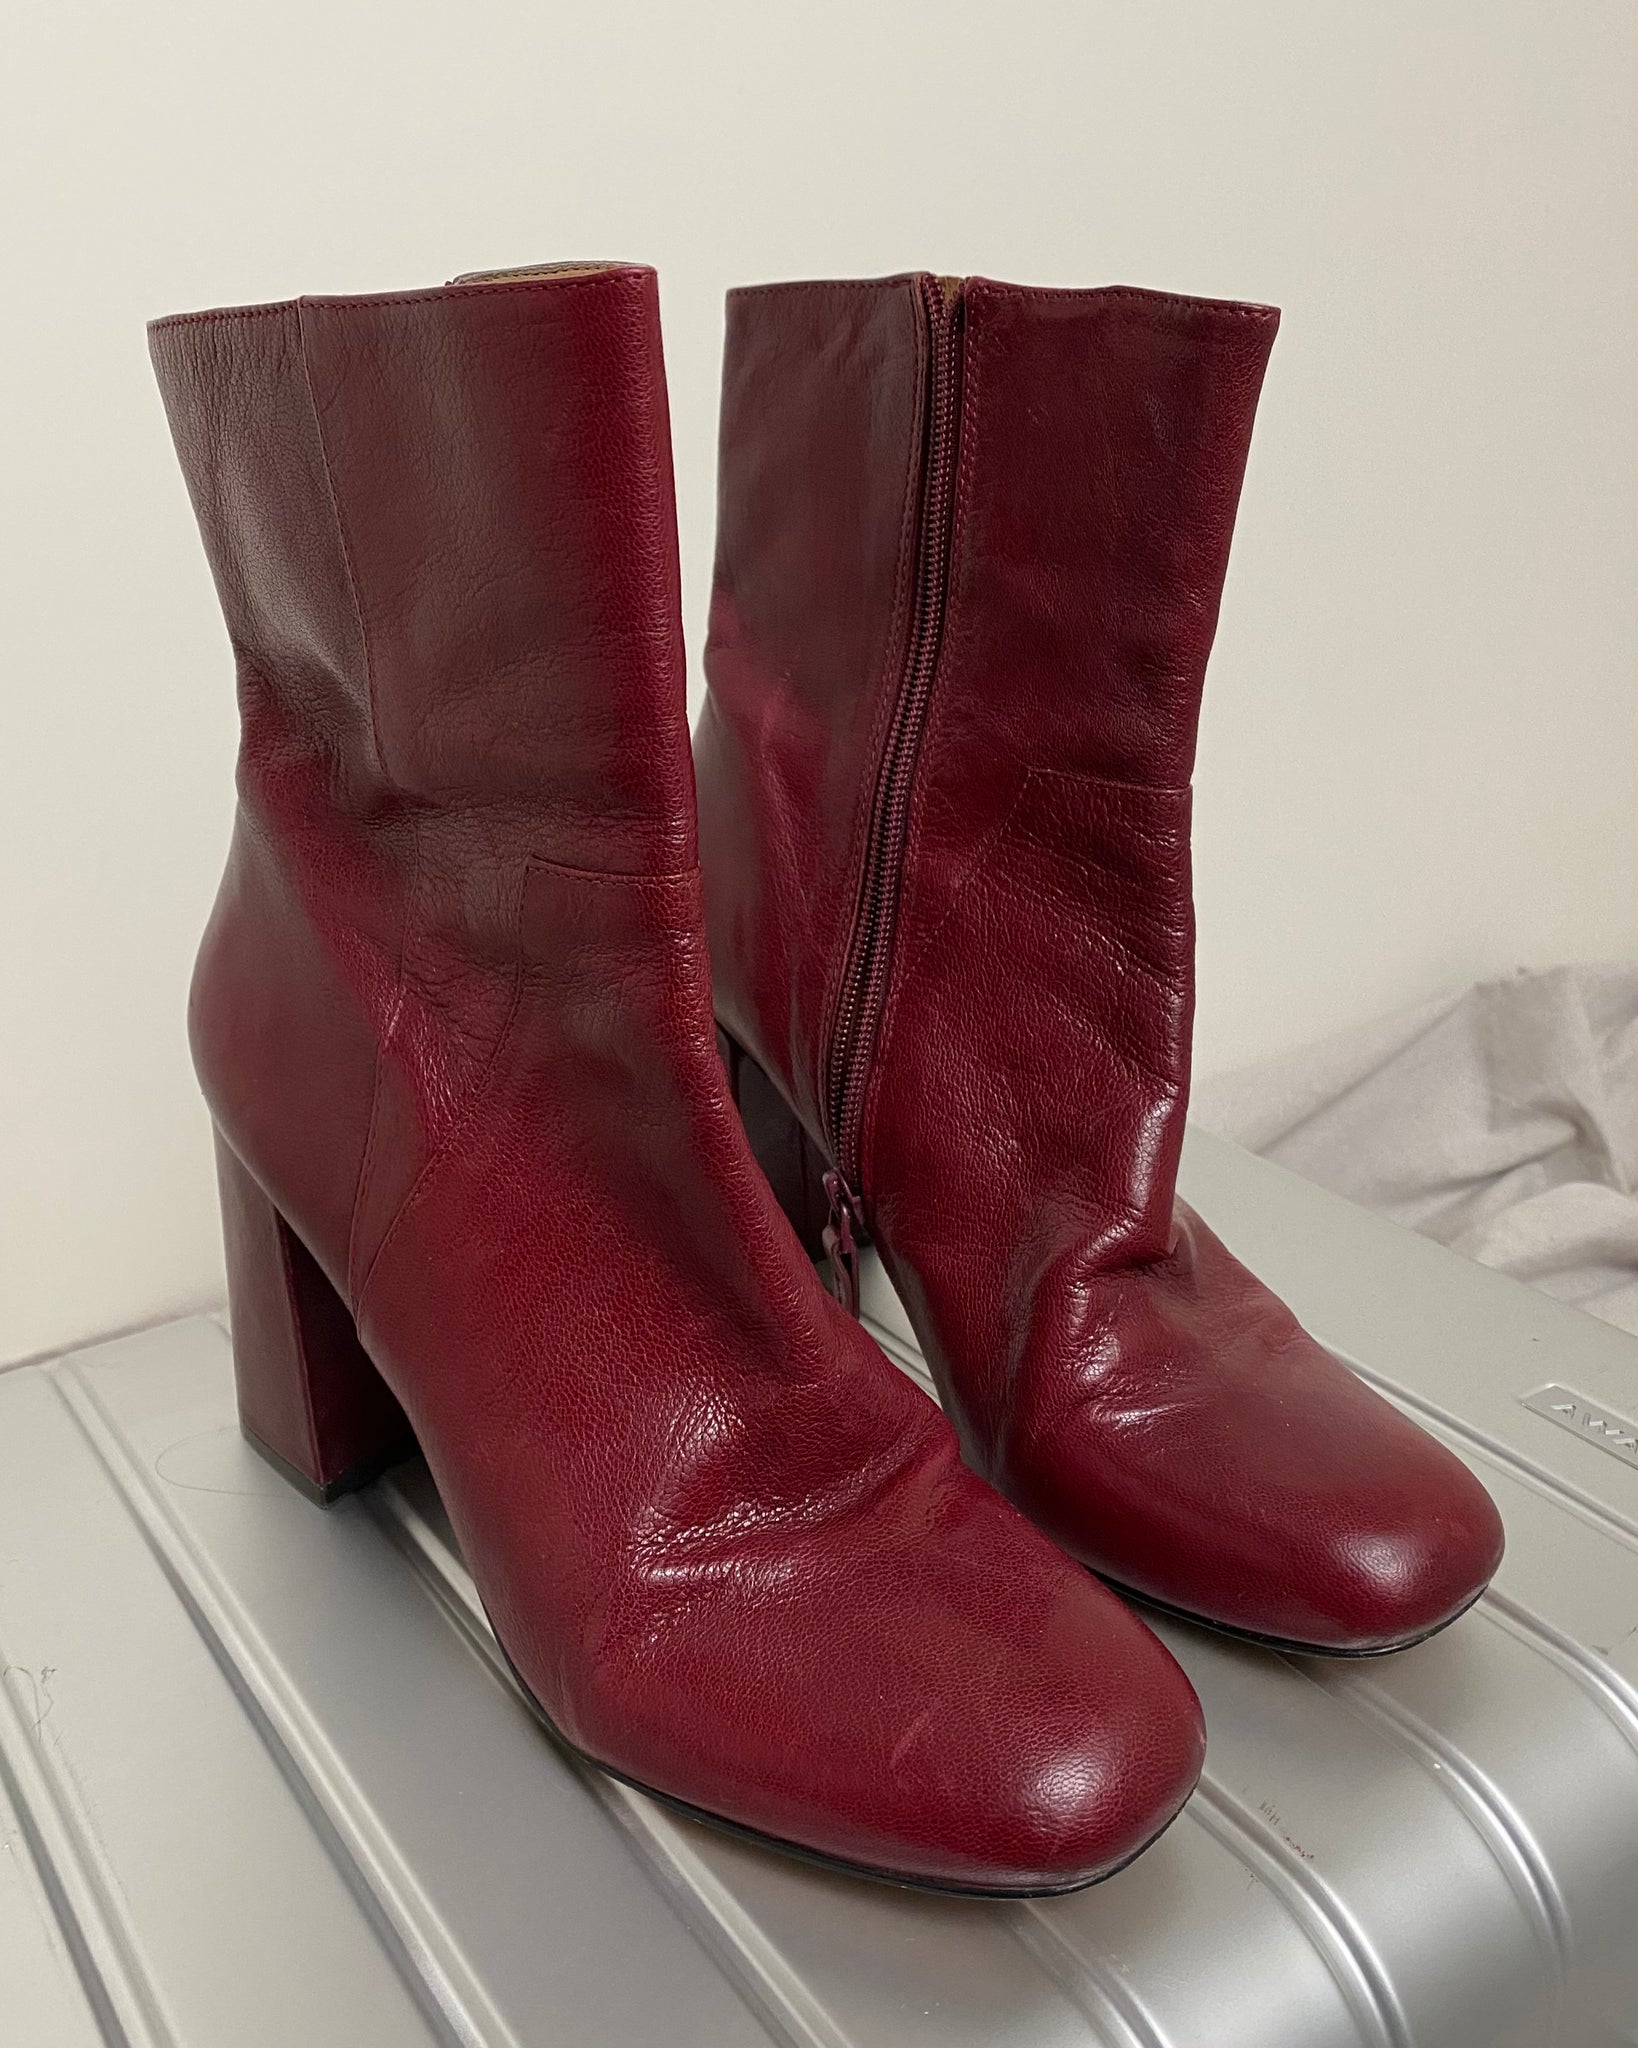 Burgundy Leather Heeled Boots (size 8.5)